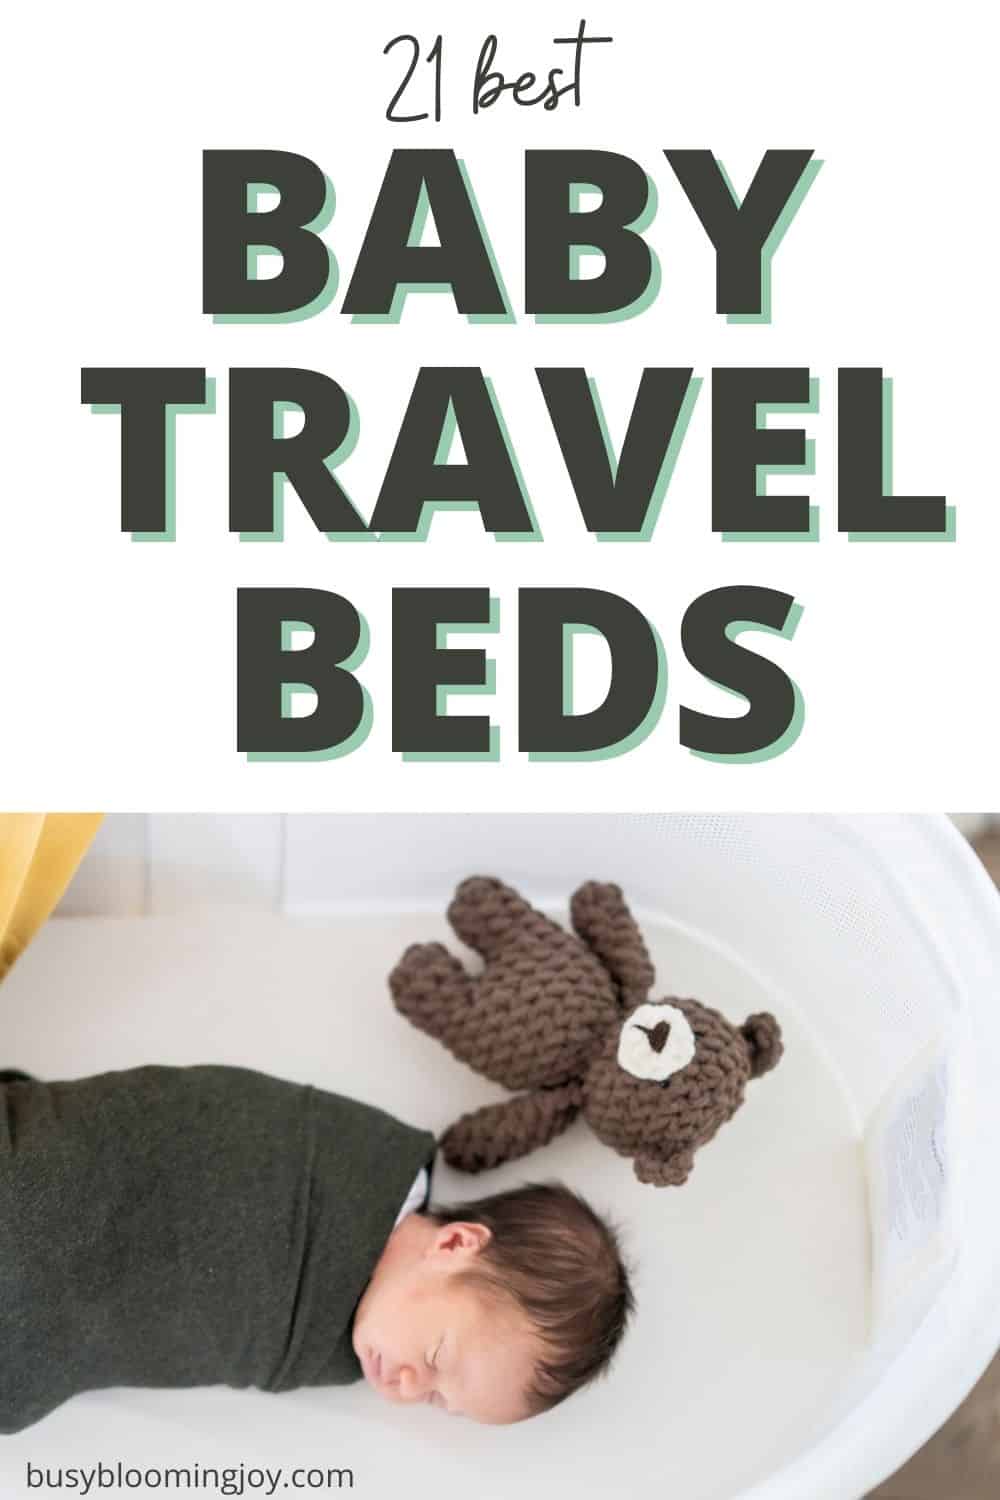 PORTABLE BABY bed feature image